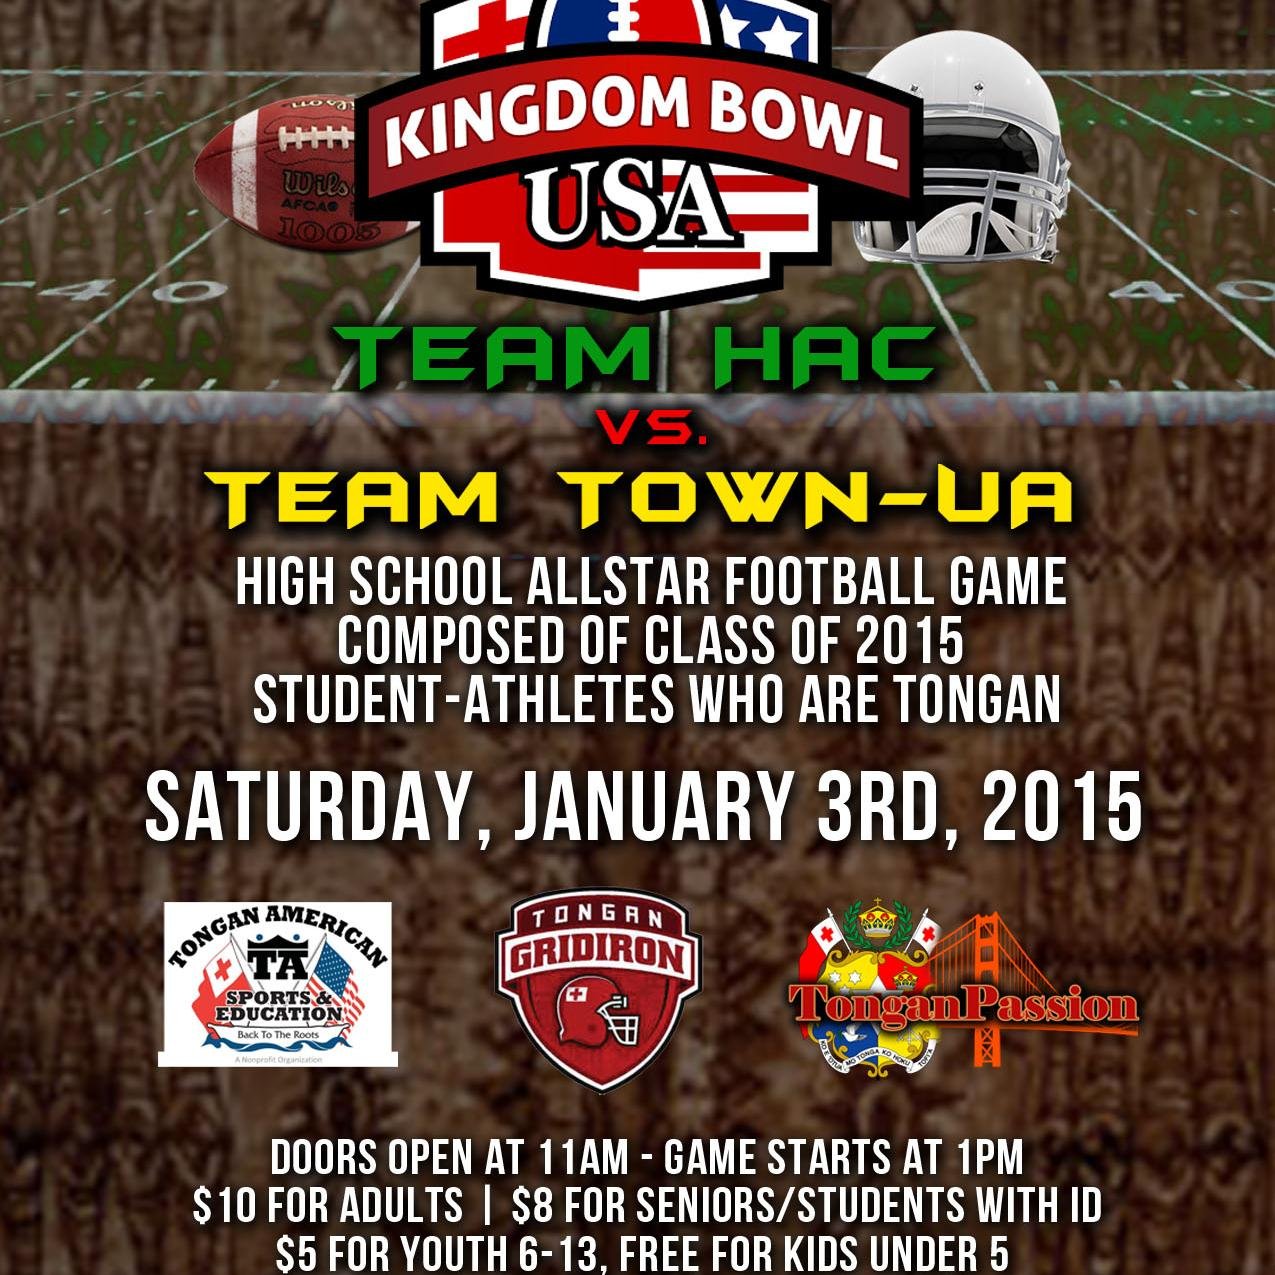 A HS Allstar football game played in Tonga composed of Tongan student-athletes from the mainland and the island sponsored by T.A.S.E. and Tongan Gridiron.